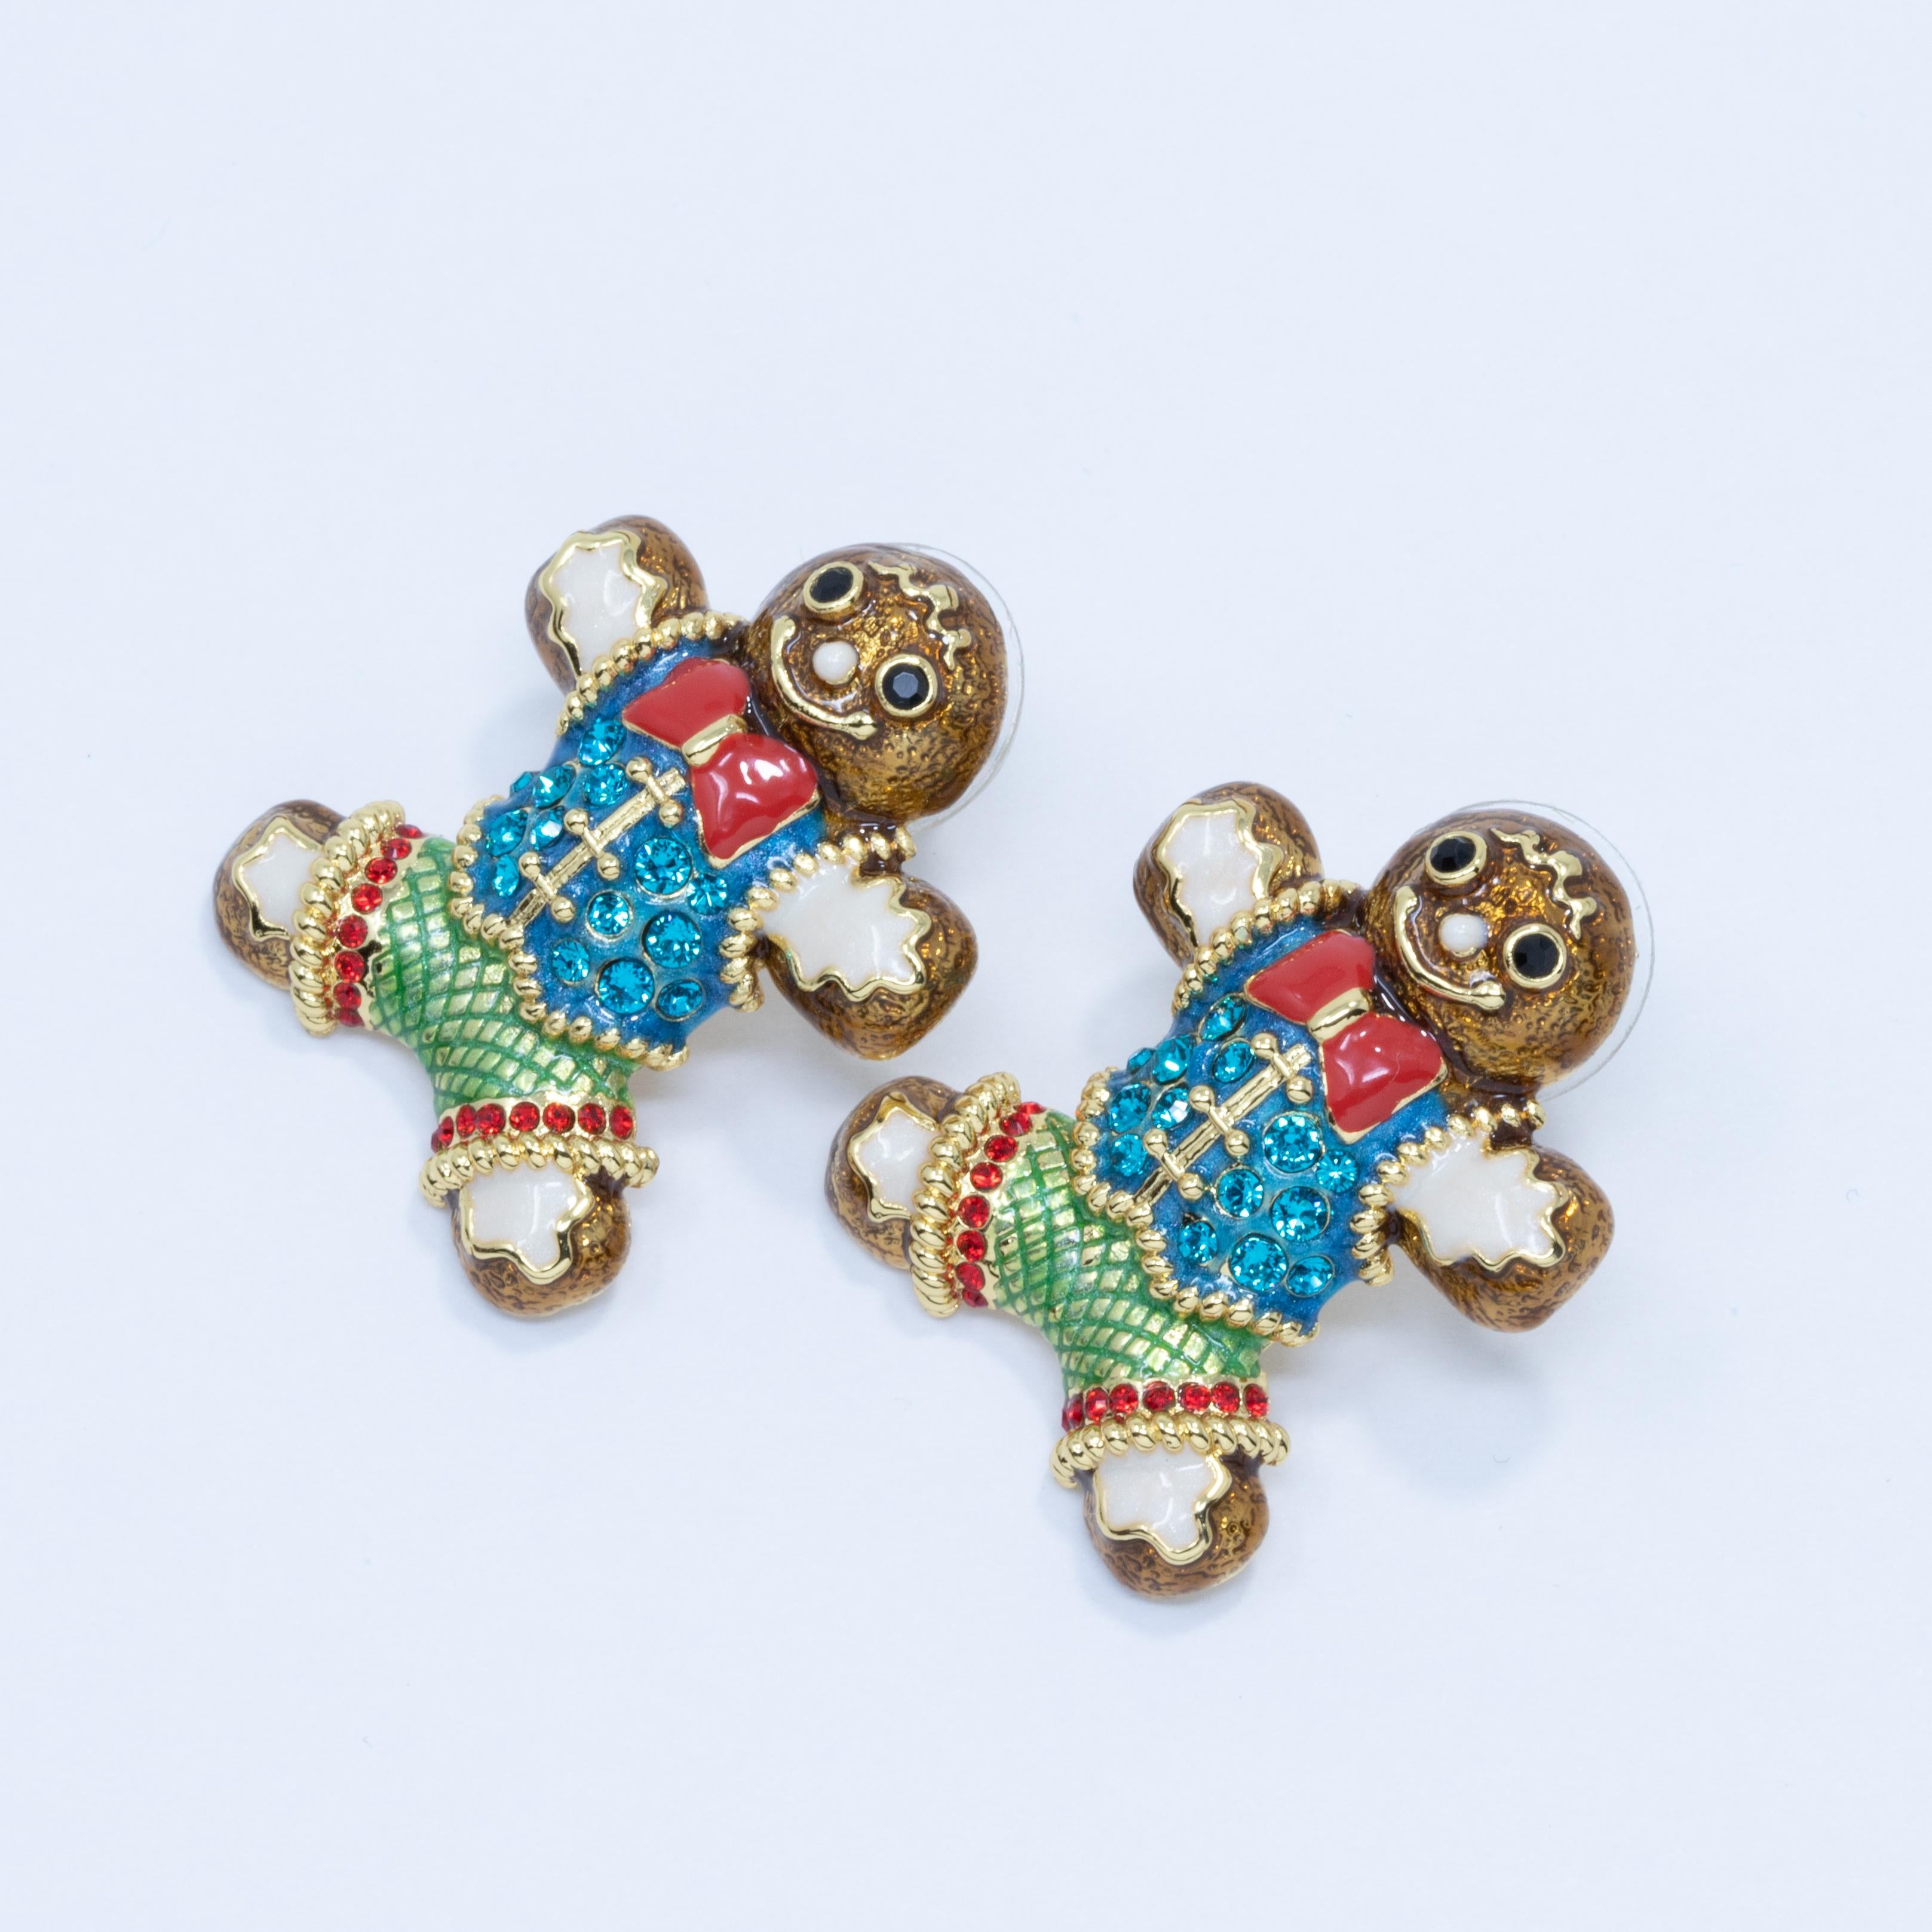 A festive pair of post-back earrings each featuring a gingerbread man enameled with holiday-themed colors and accented with cyan and ruby crystals. Set on gold-plated metal.

Enamel colors: Red, Brown, Green, White

Hallmarks: Jay, Jay Strongwater,